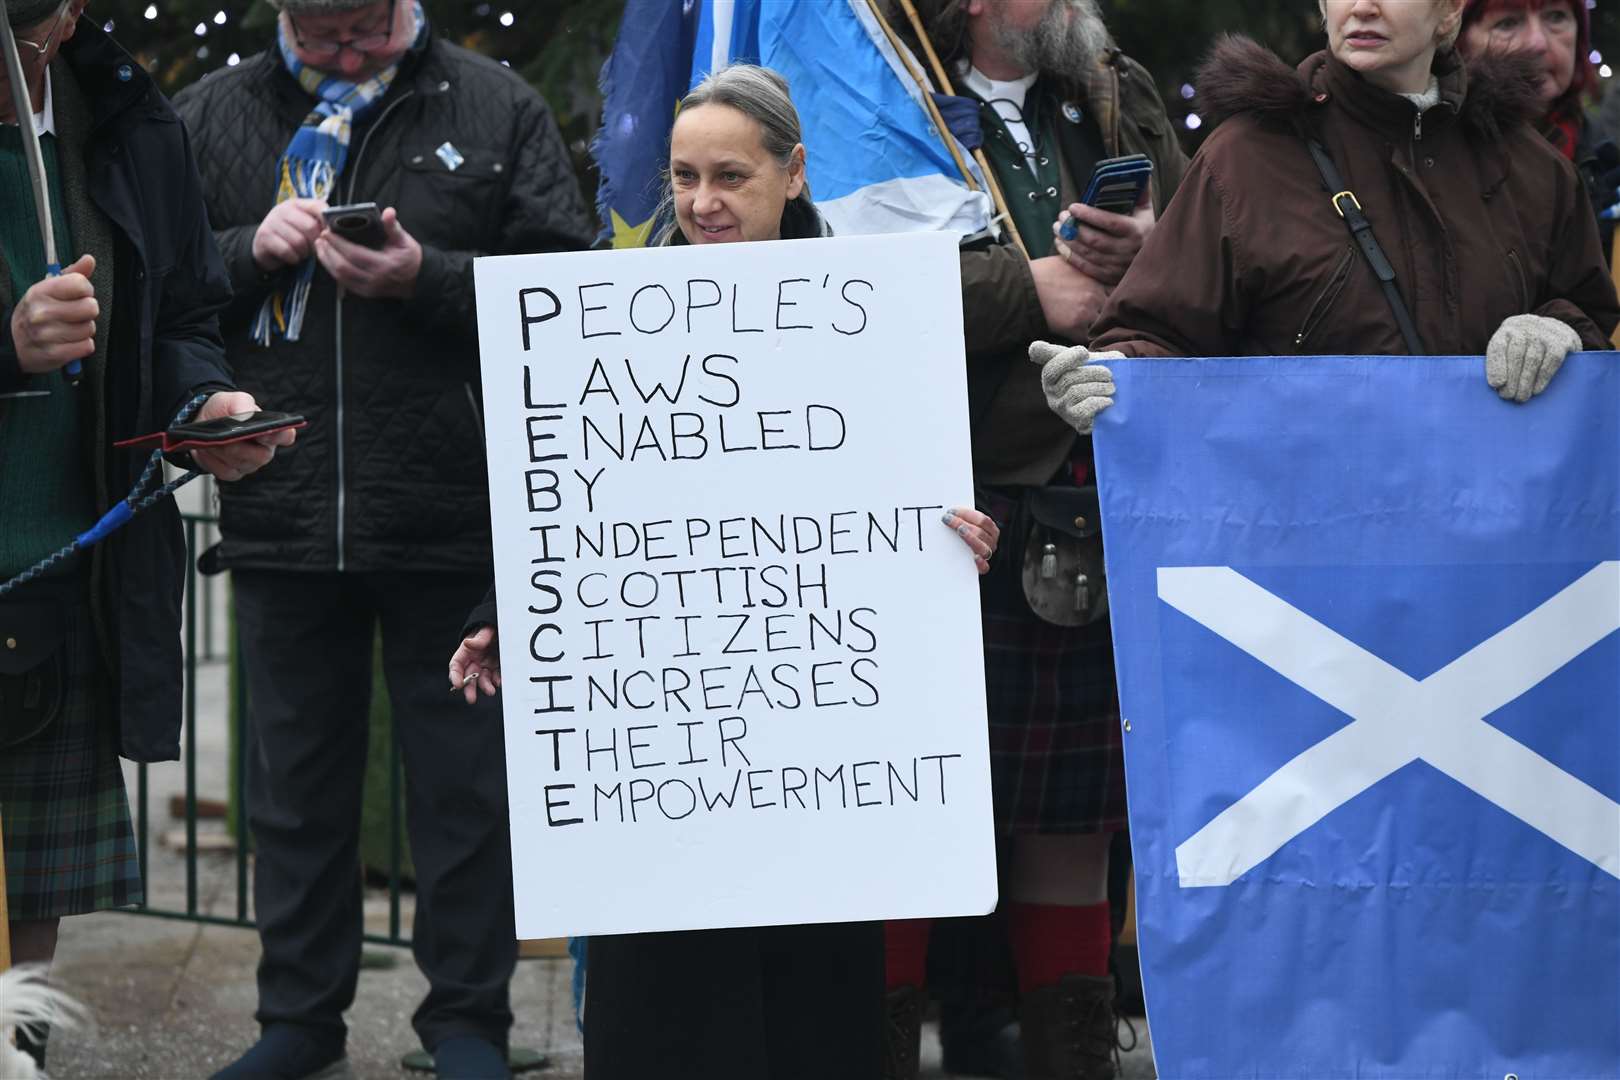 People's laws enabled by independent Scottish citizens increases their empowerment placard. Picture: James Mackenzie